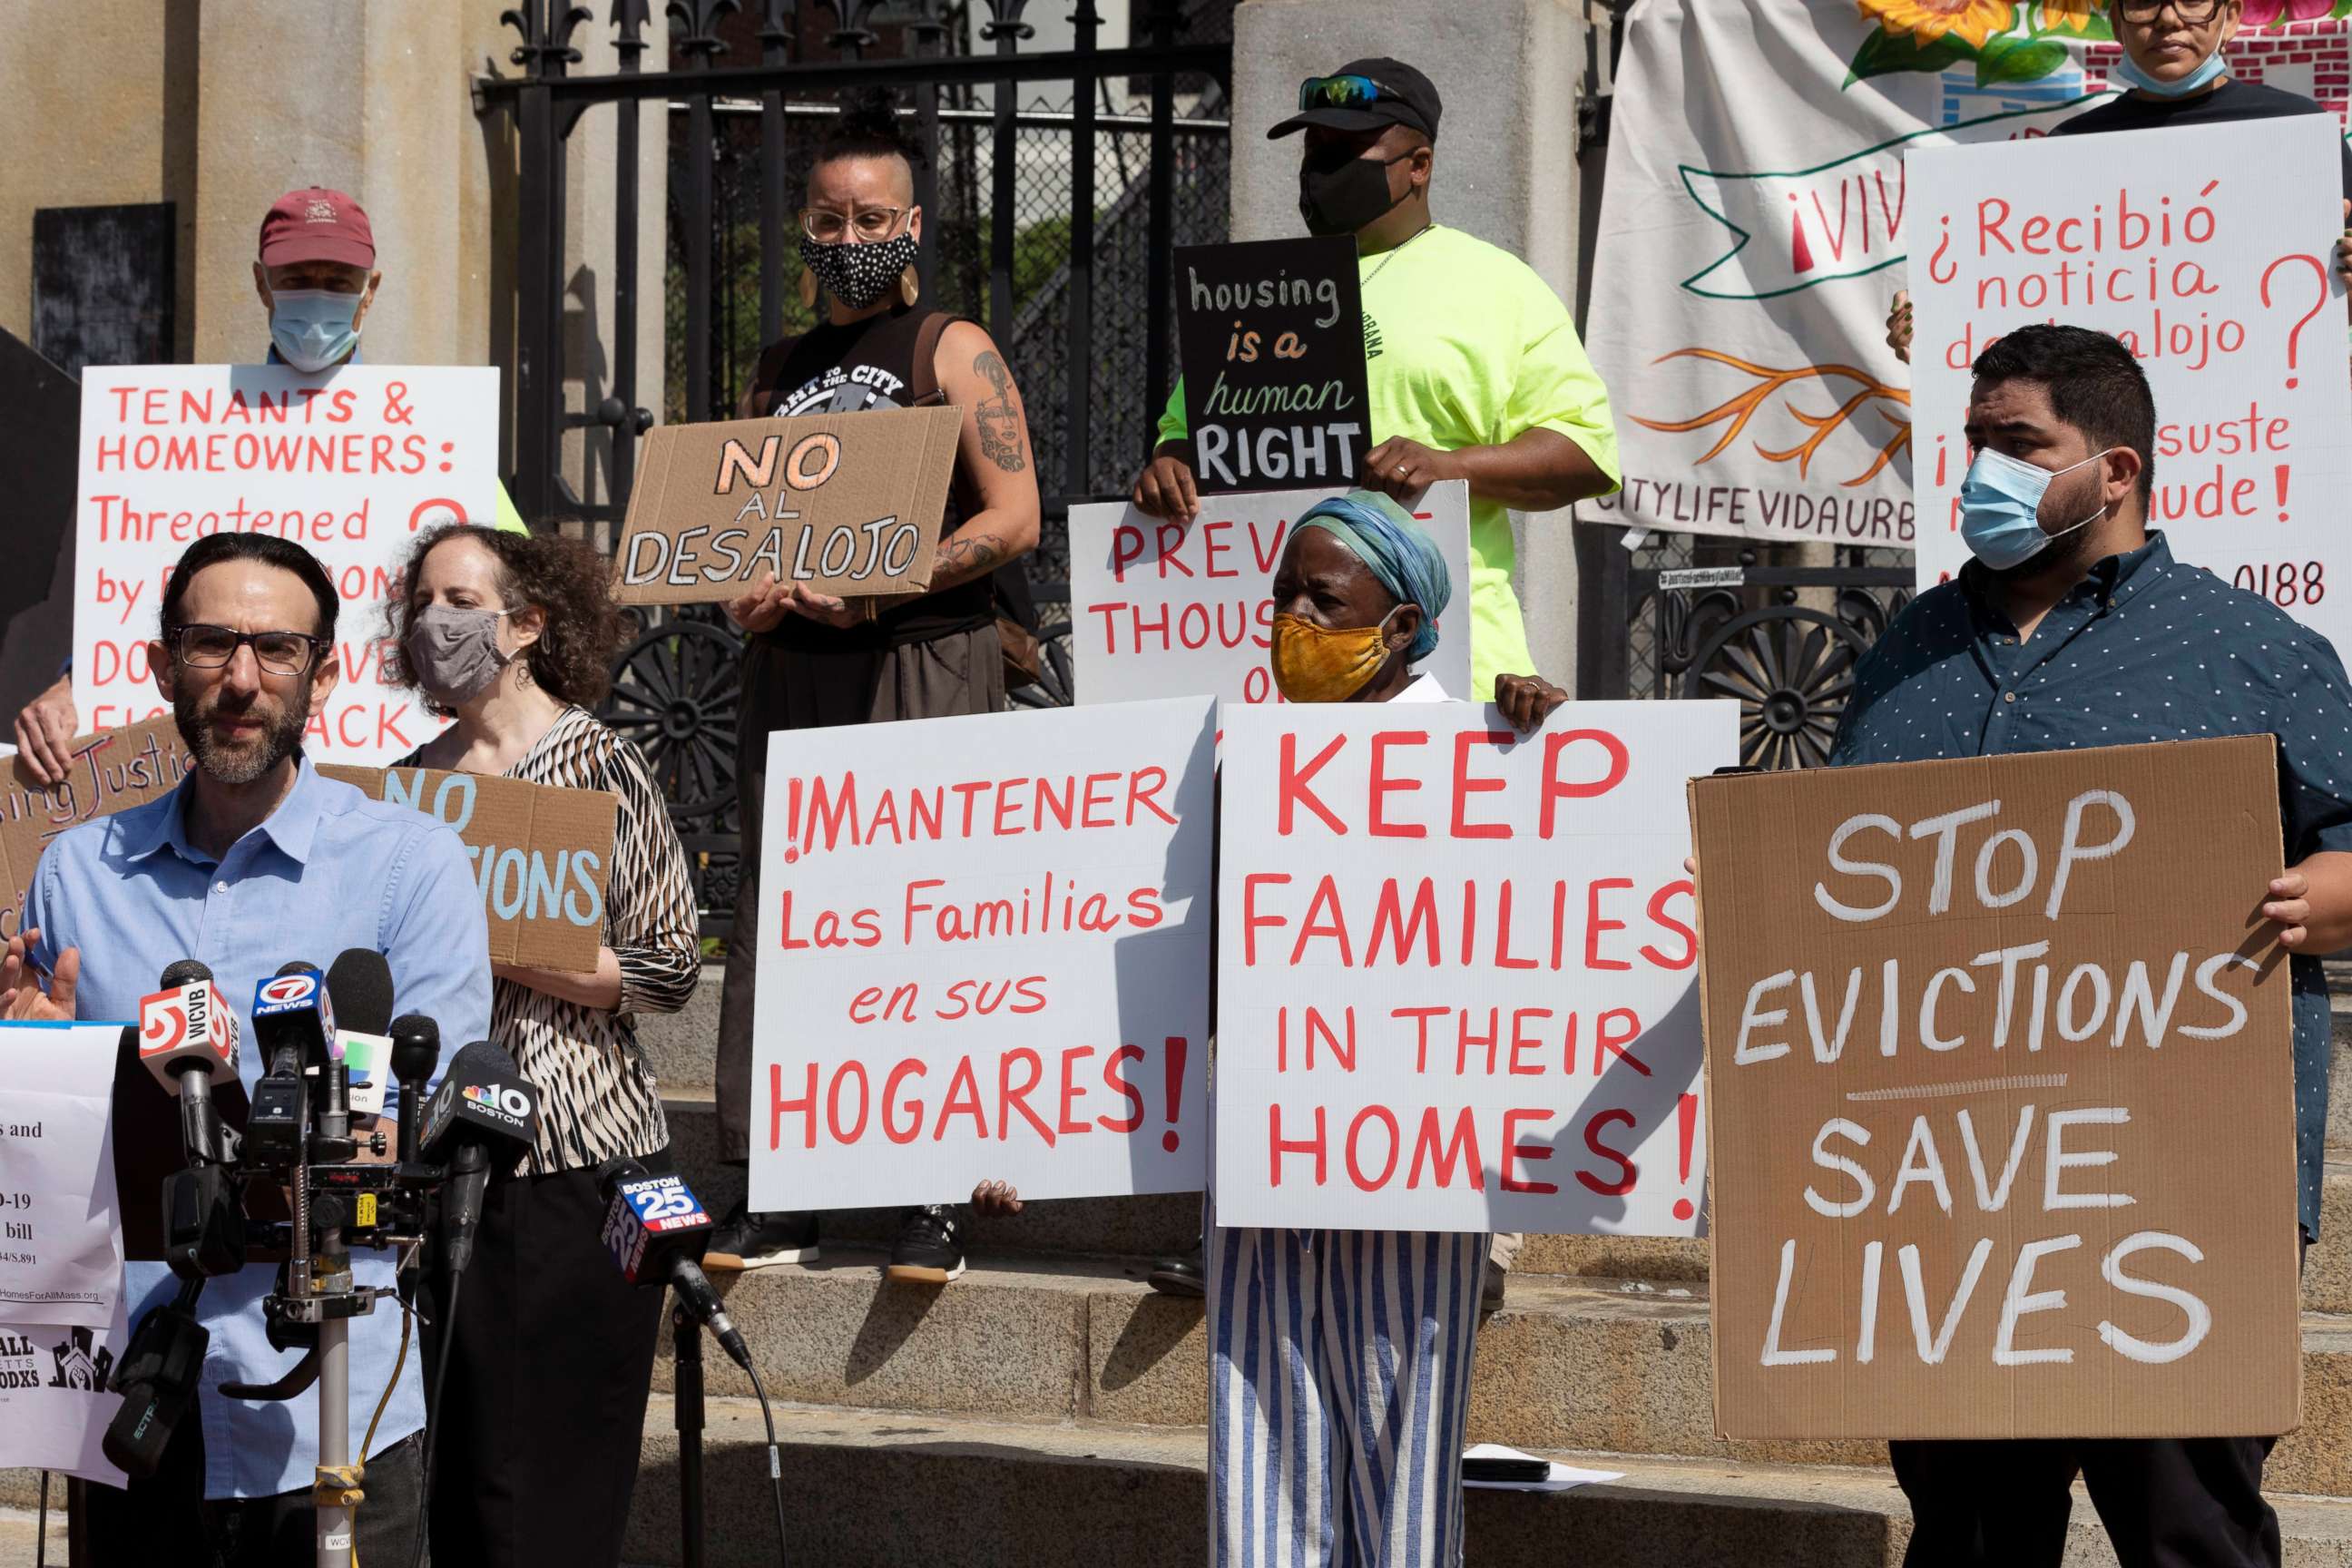 PHOTO: People from a coalition of housing justice groups hold signs protesting evictions during a news conference outside the Statehouse, Friday, July 30, 2021, in Boston.